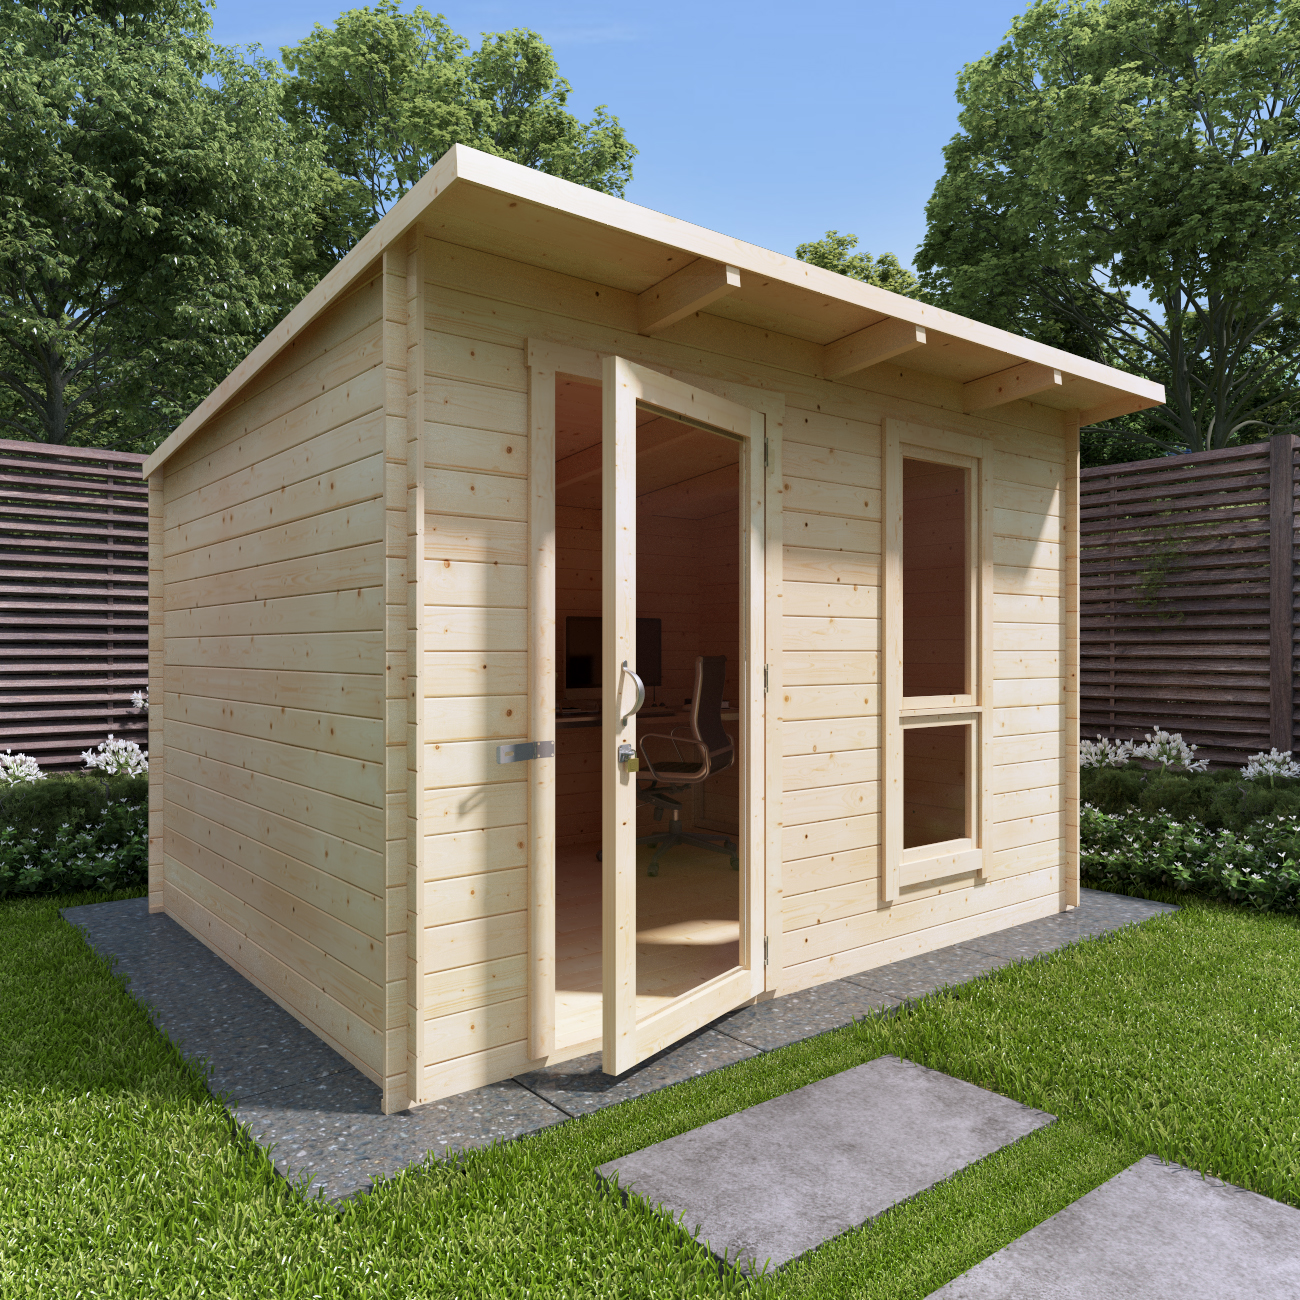 3 x 2.5 Log Cabin - BillyOh Mia Log Cabin - 3.0m x 2.5m Wooden Building - 19mm Tongue & Groove Wall